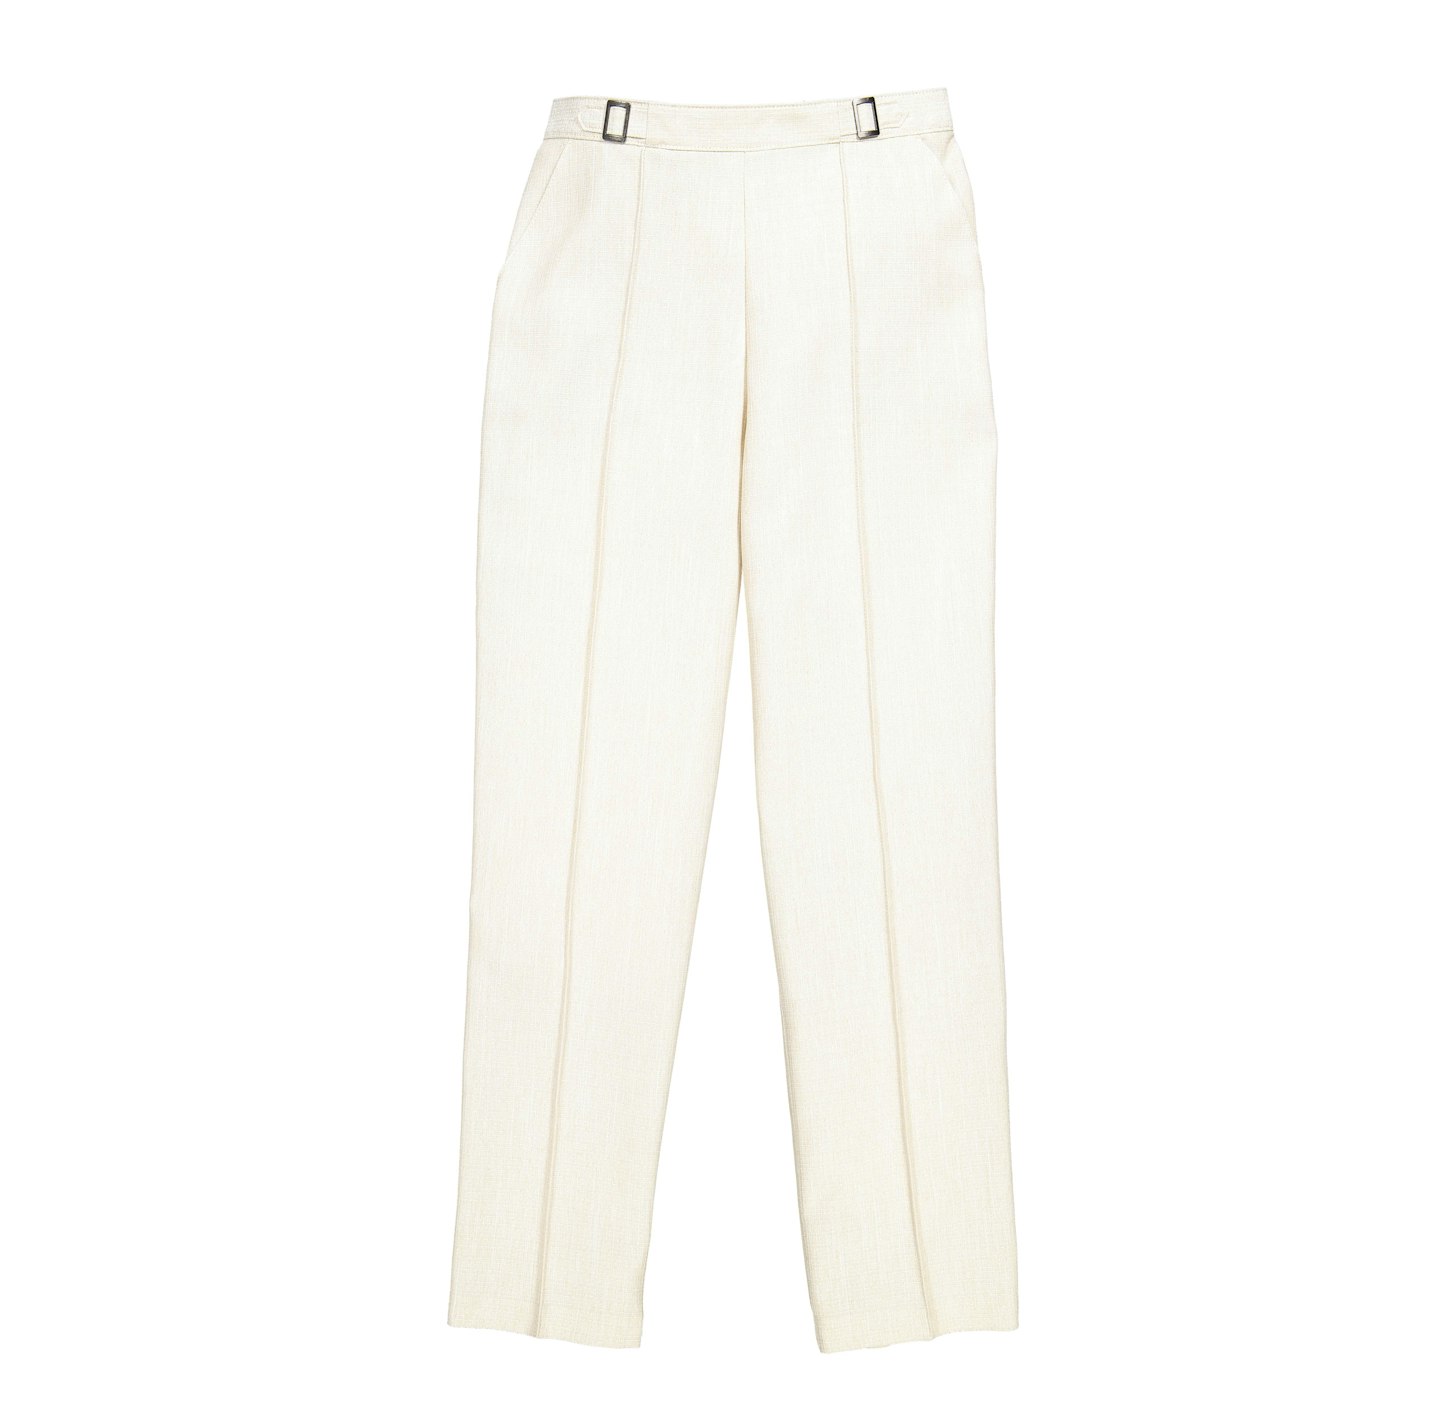 M&S trousers pale pink